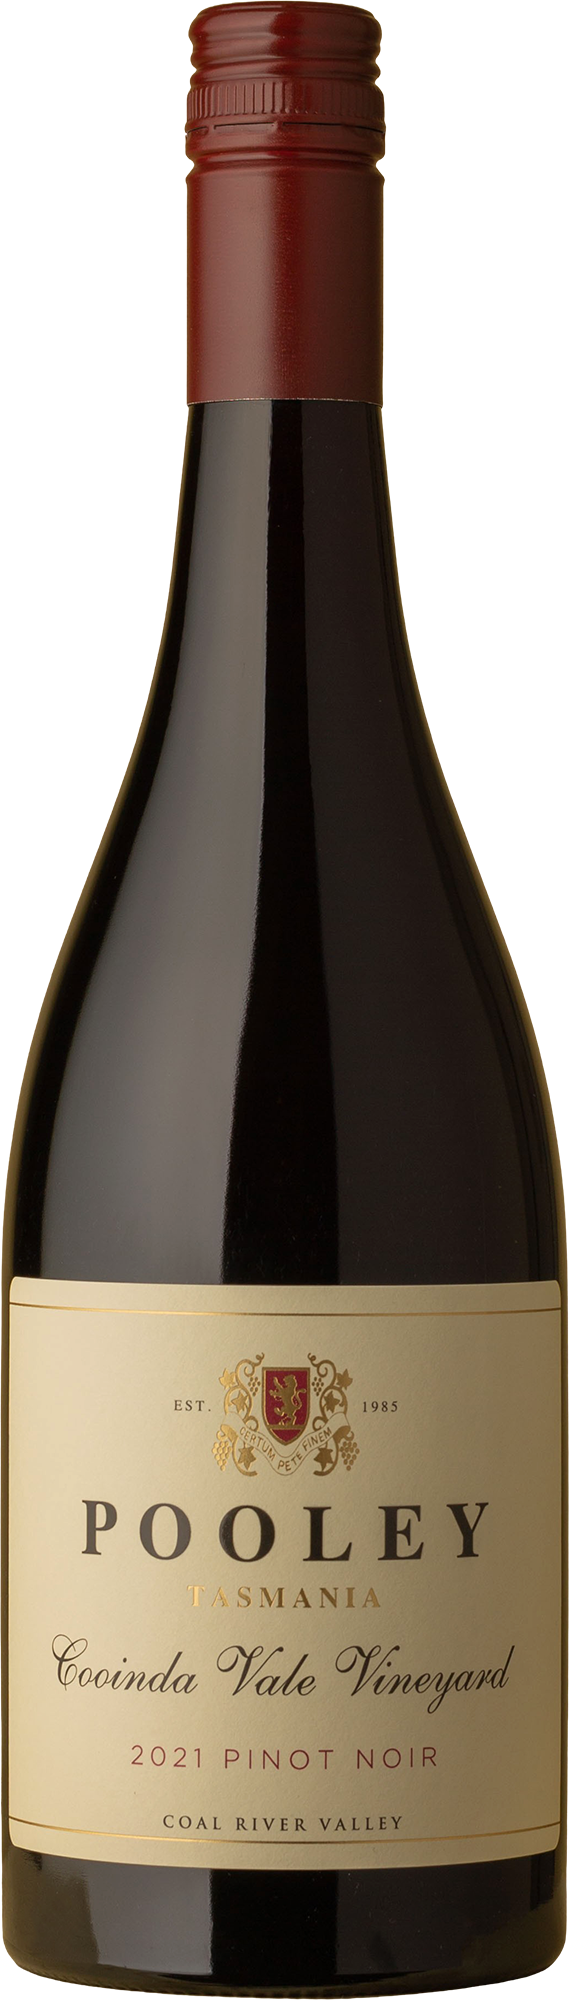 Pooley - Cooinda Vale Pinot Noir 2021 Red Wine